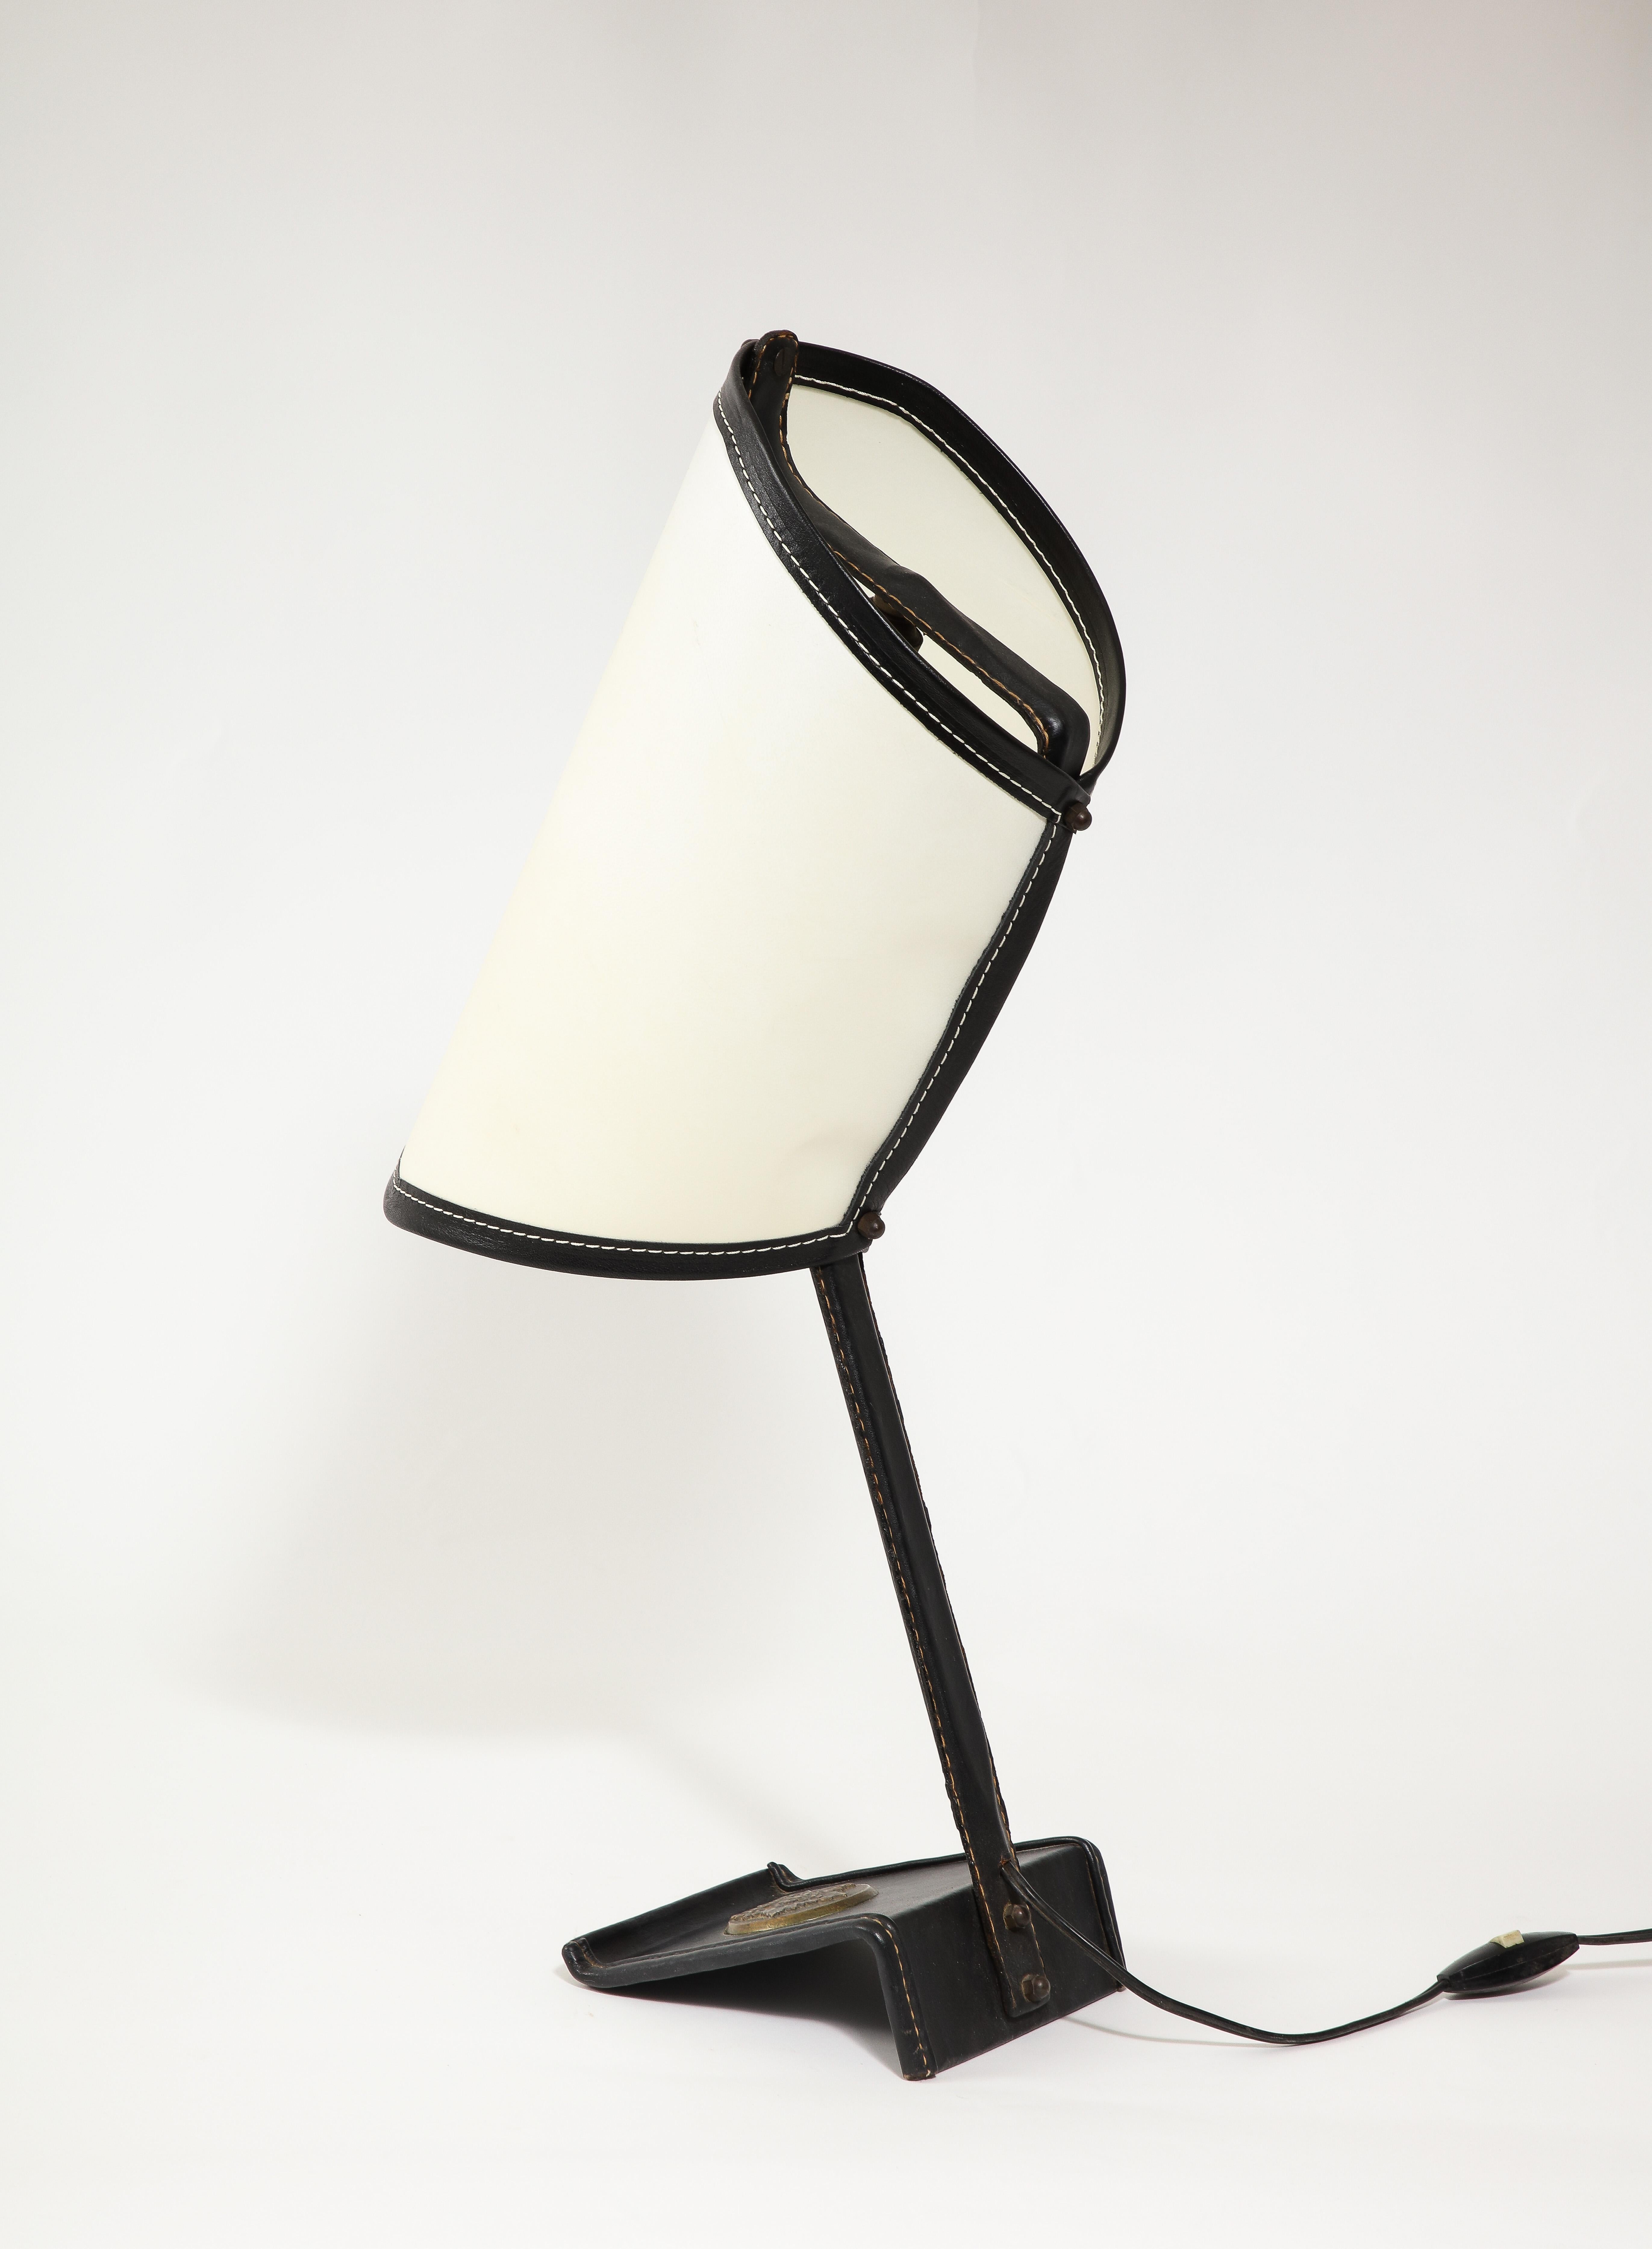 Brass Jacques Adnet Curved Desk Lamp With Black Leather Trim, France 1950's For Sale